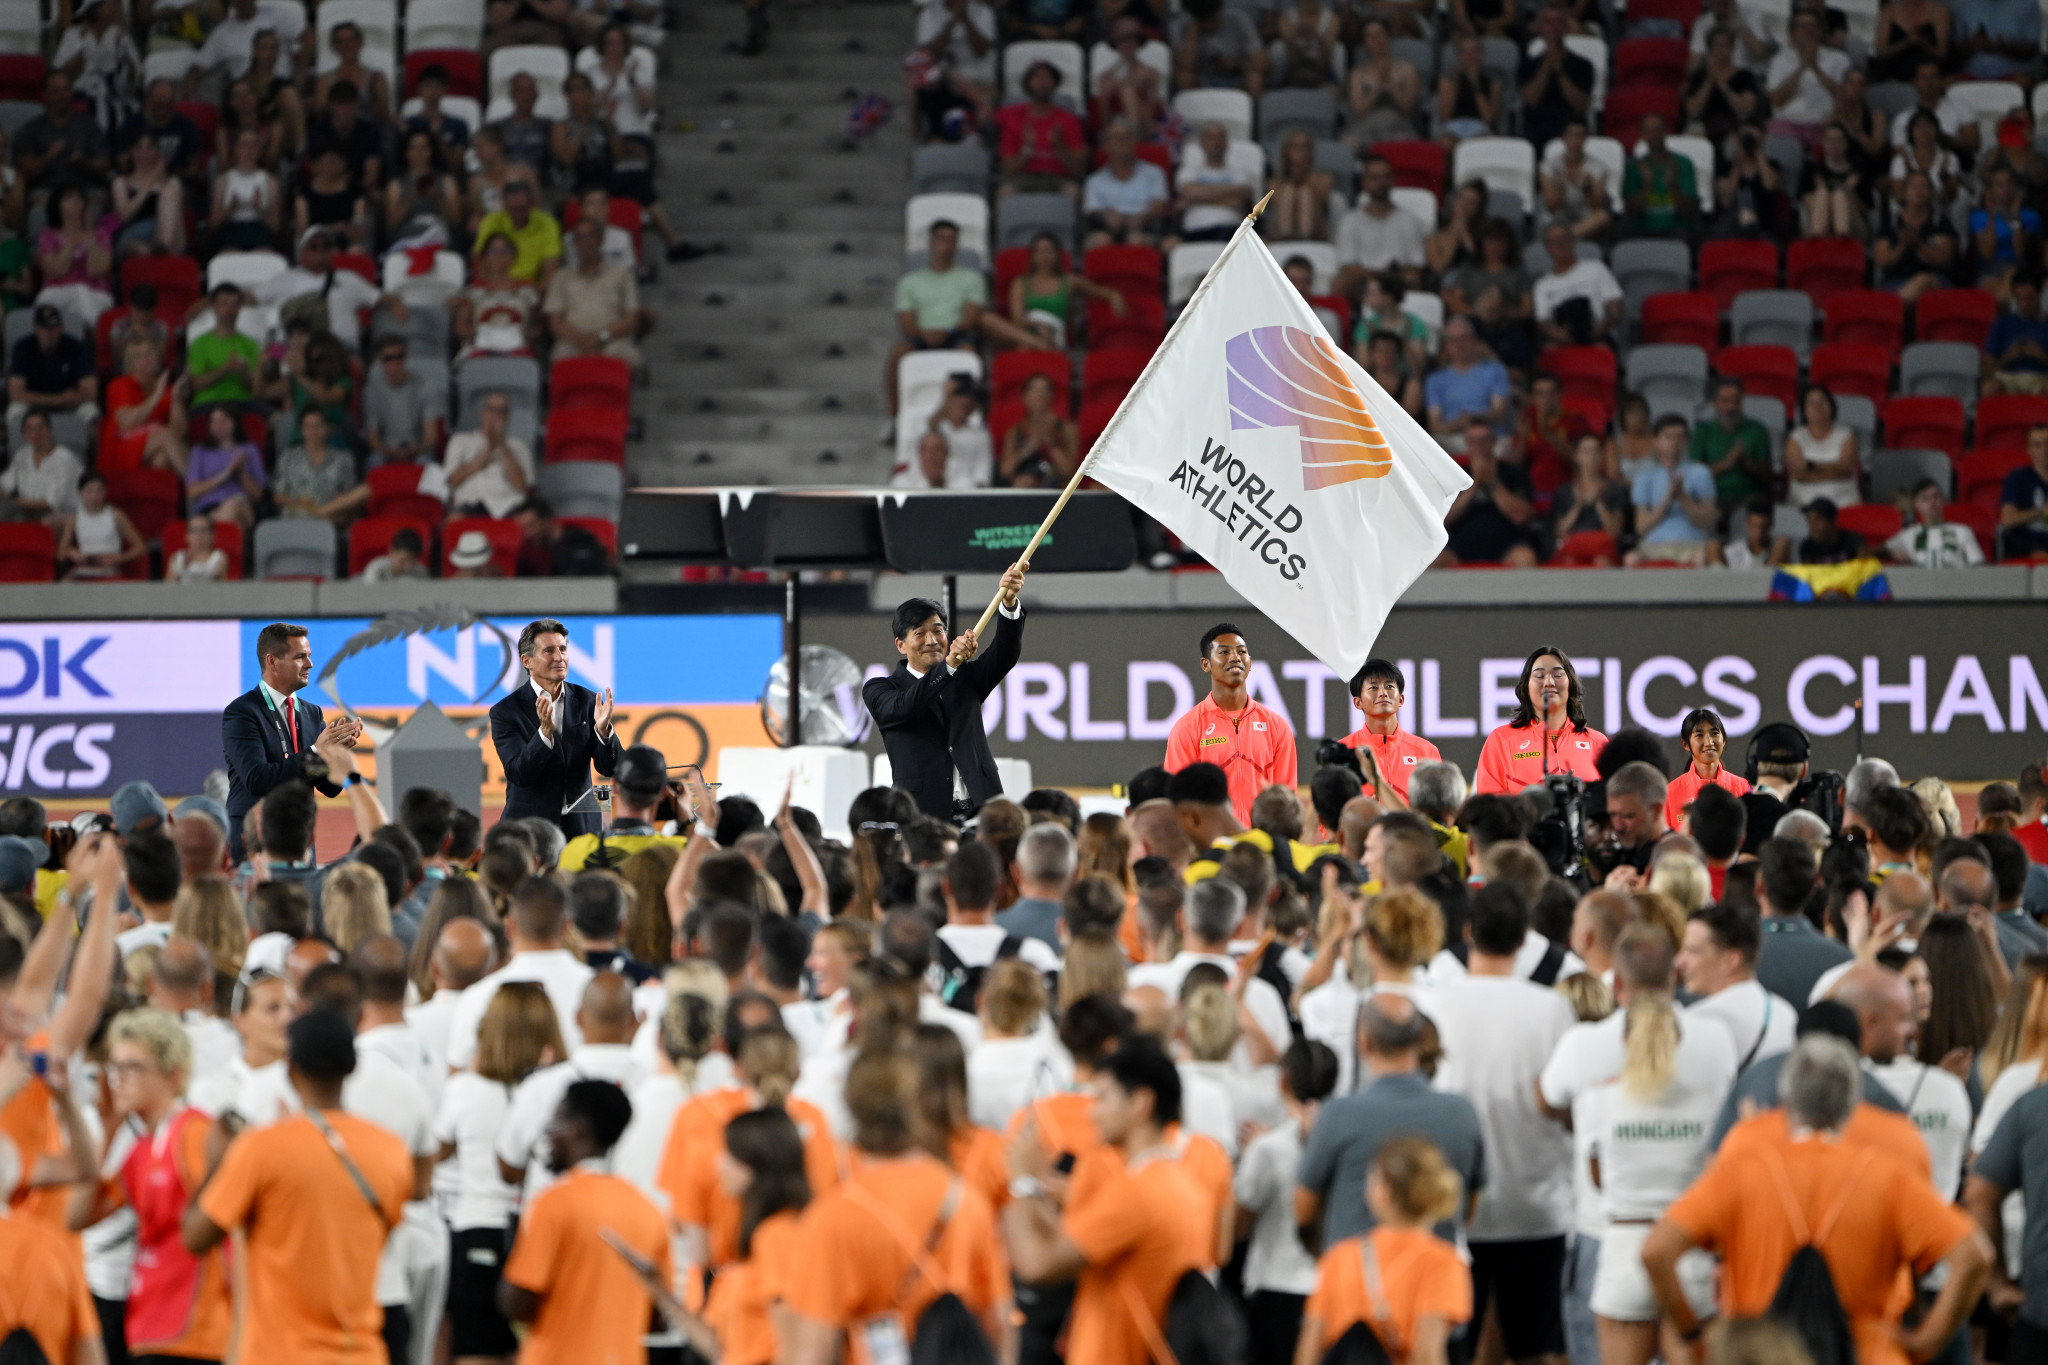 Volunteers were lauded and the World Athletics flag handed to 2025 World Championships hosts Tokyo at the Closing Ceremony ©Getty Images